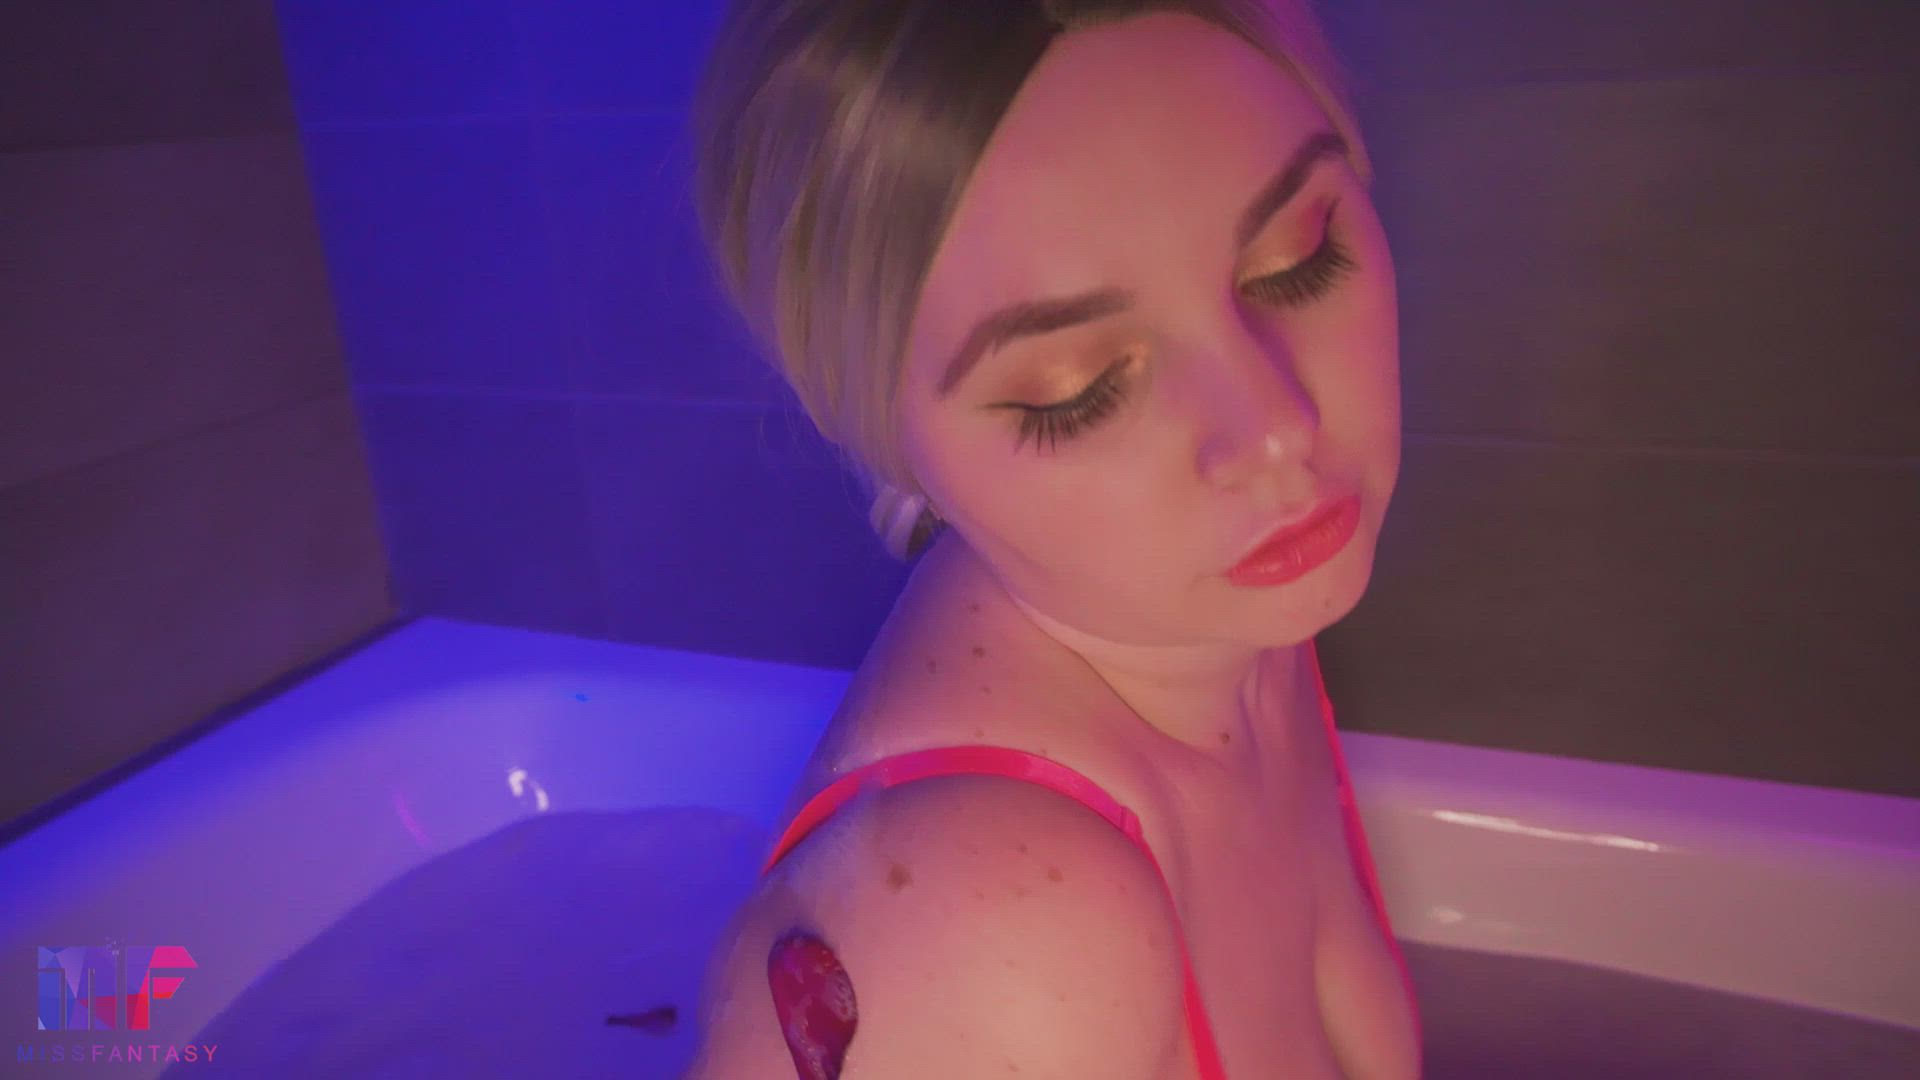 Bathroom porn video with onlyfans model Miss Fantasy <strong>@miss_fantasy_13</strong>